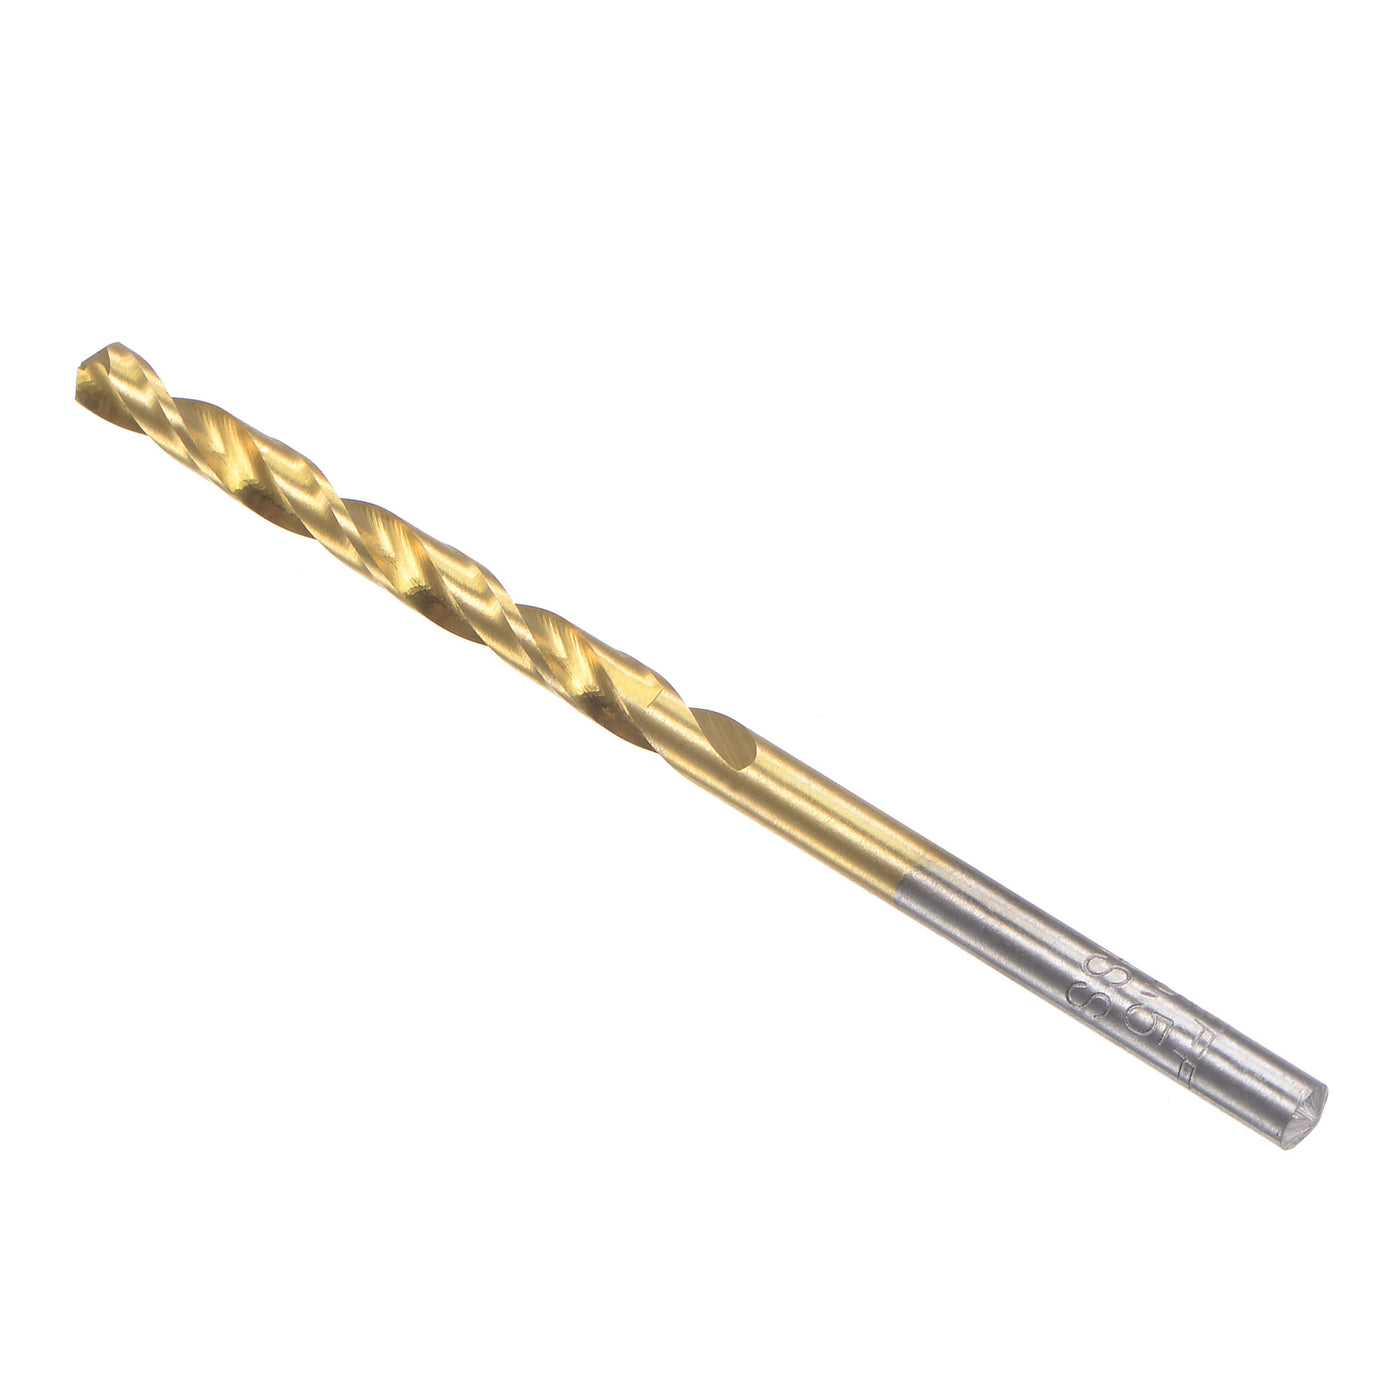 uxcell Uxcell High Speed Steel Twist Drill Bit 3.5mm Fully Ground Titanium Coated 2 Pcs